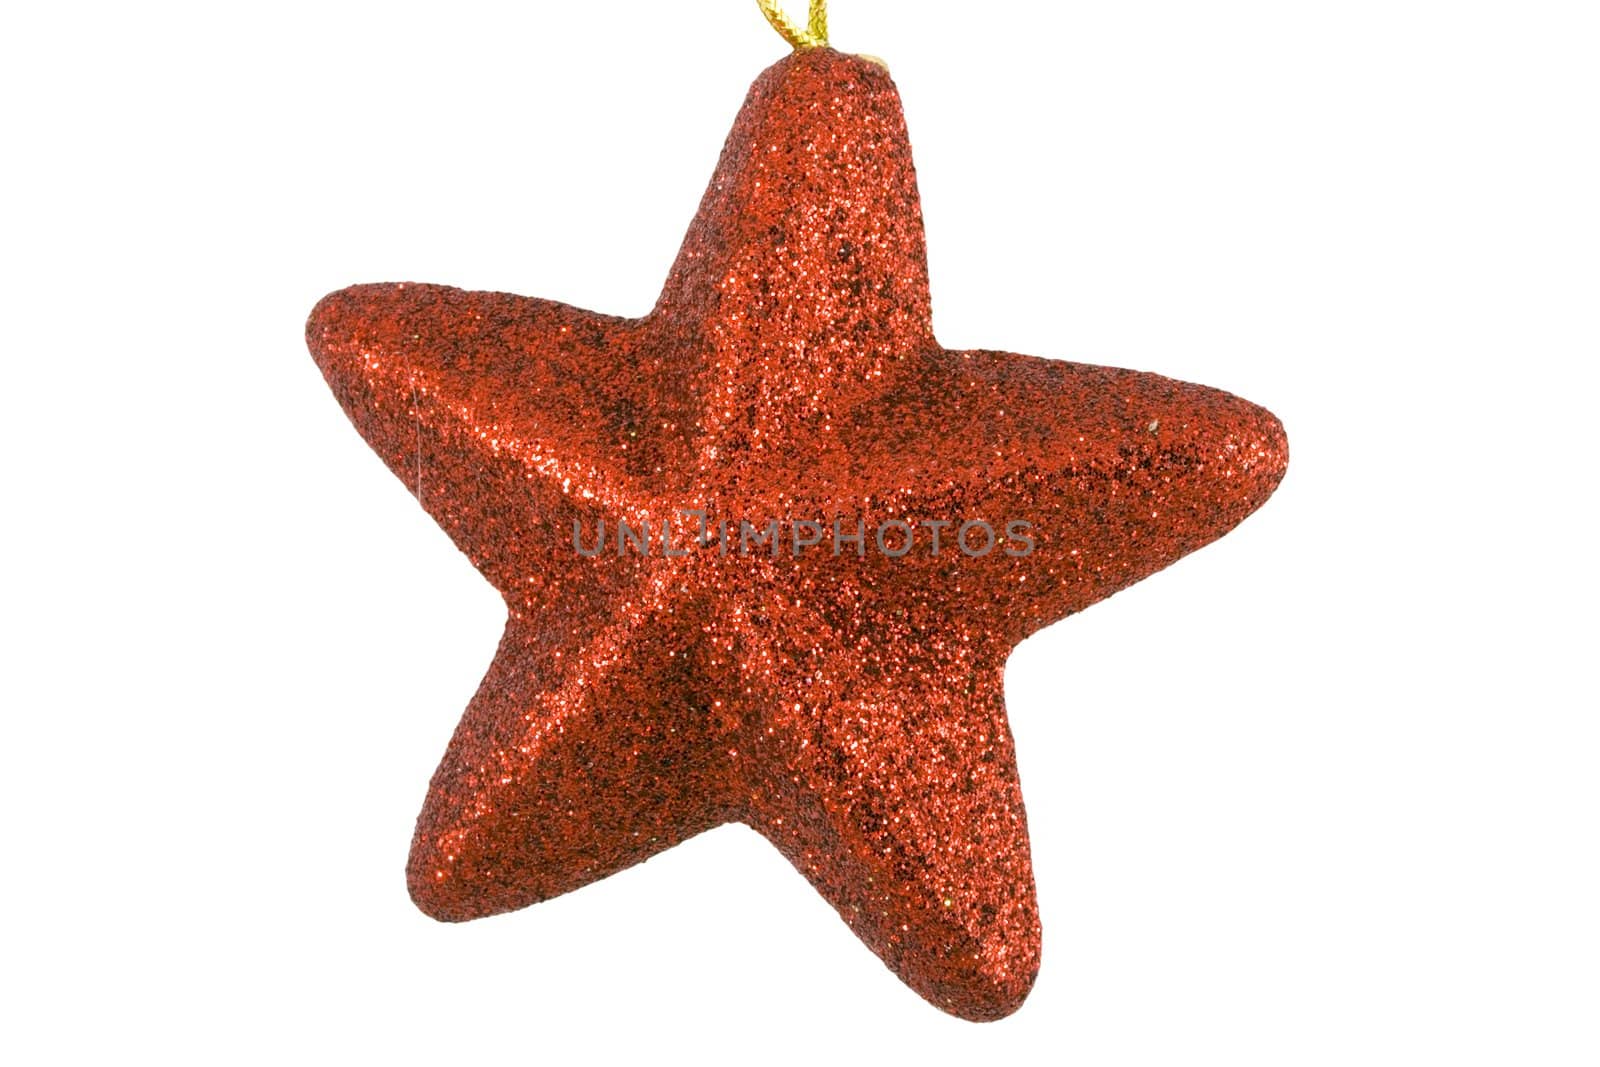 a christmas ornament - seasonal decoration - isolated - close up